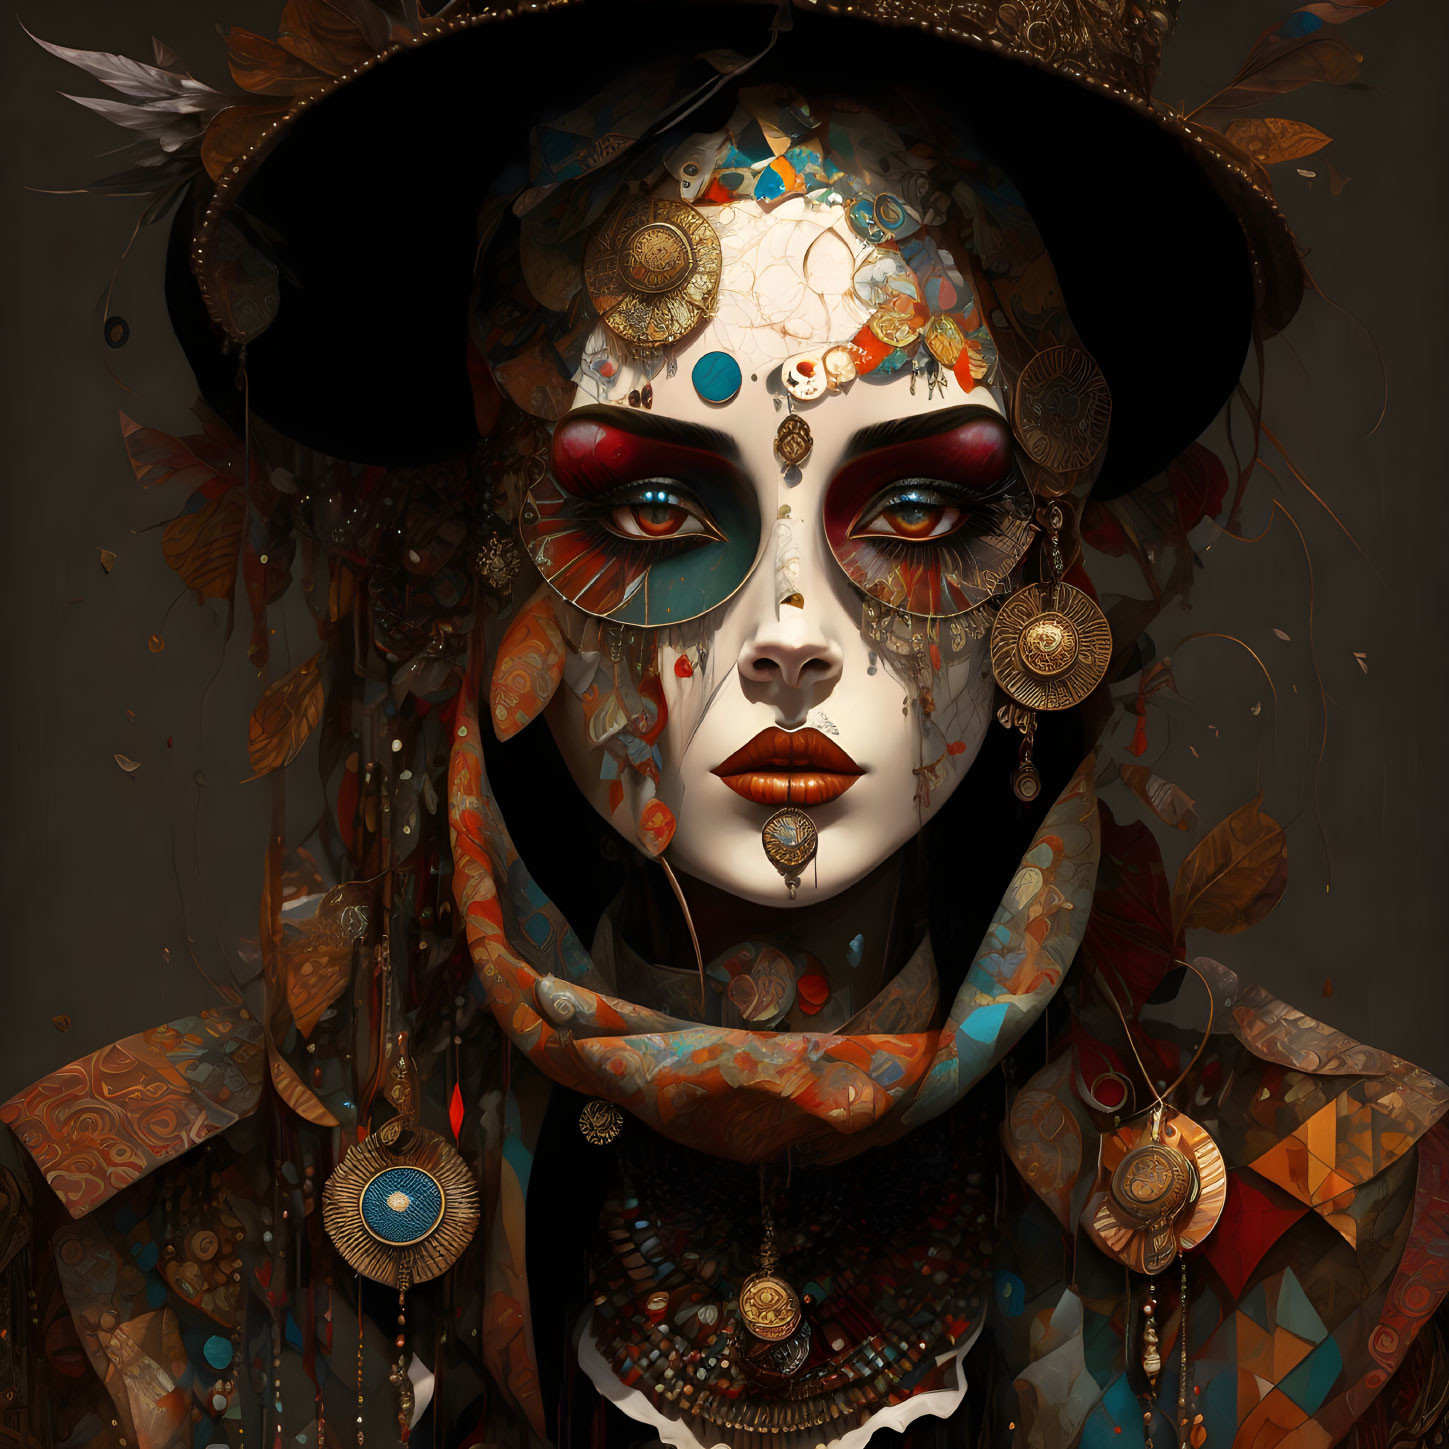 Stylized portrait featuring ornate makeup and accessories